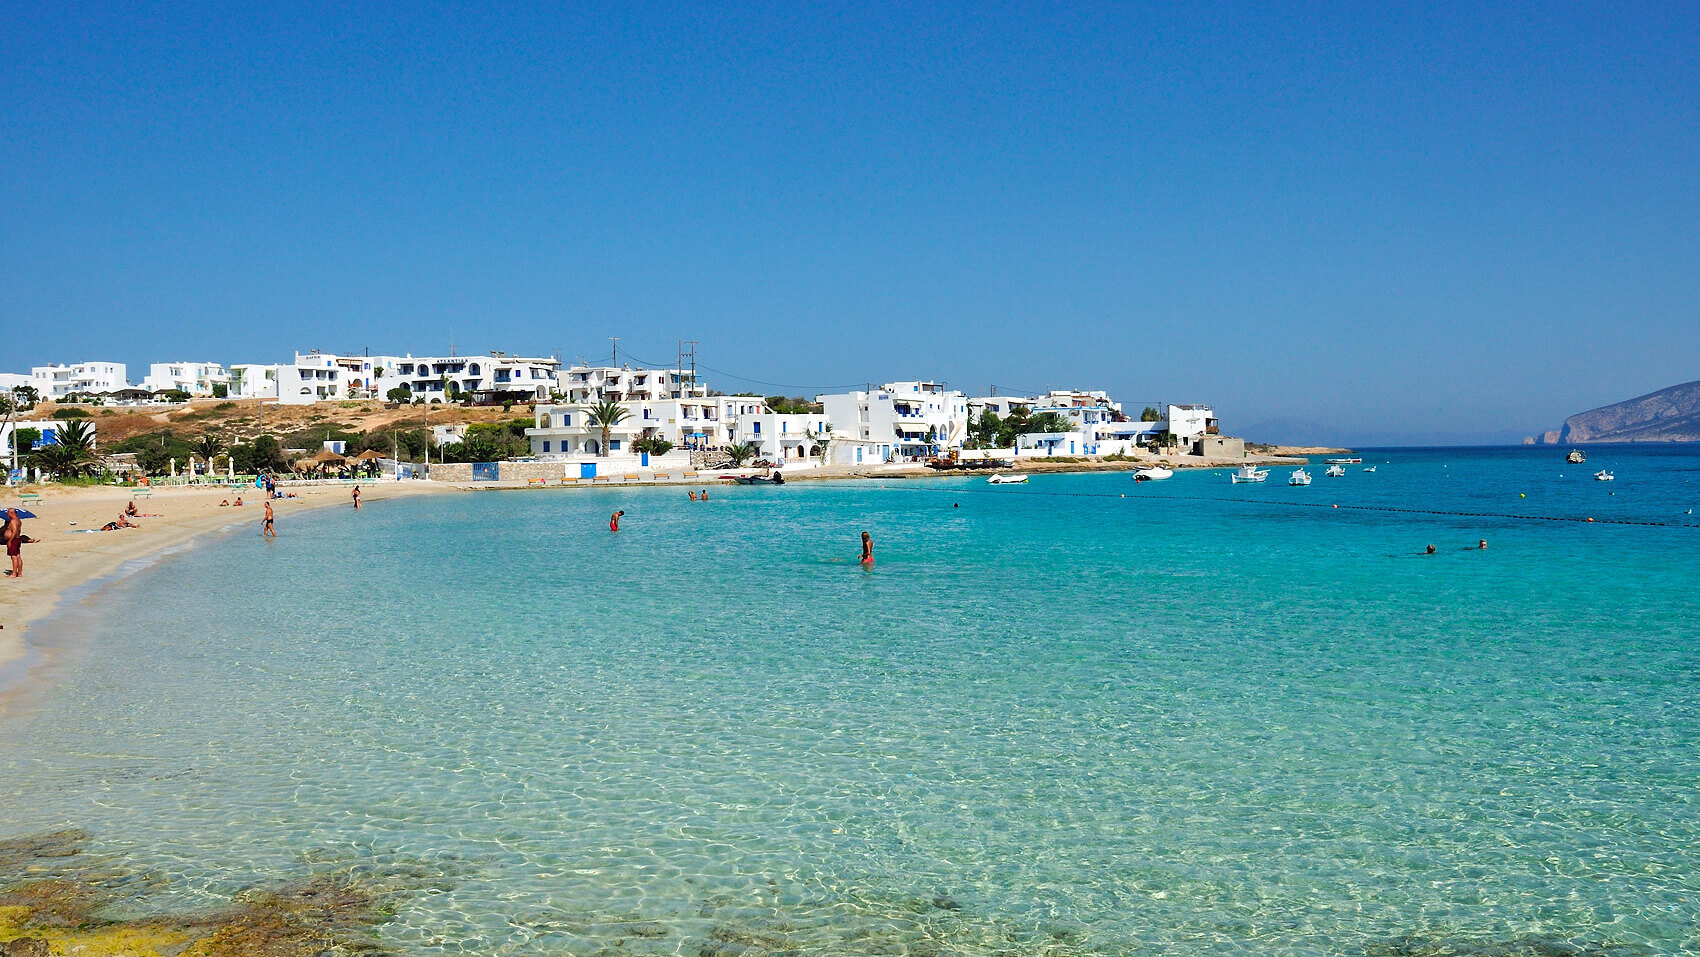 Koufonissi Town and townbeach